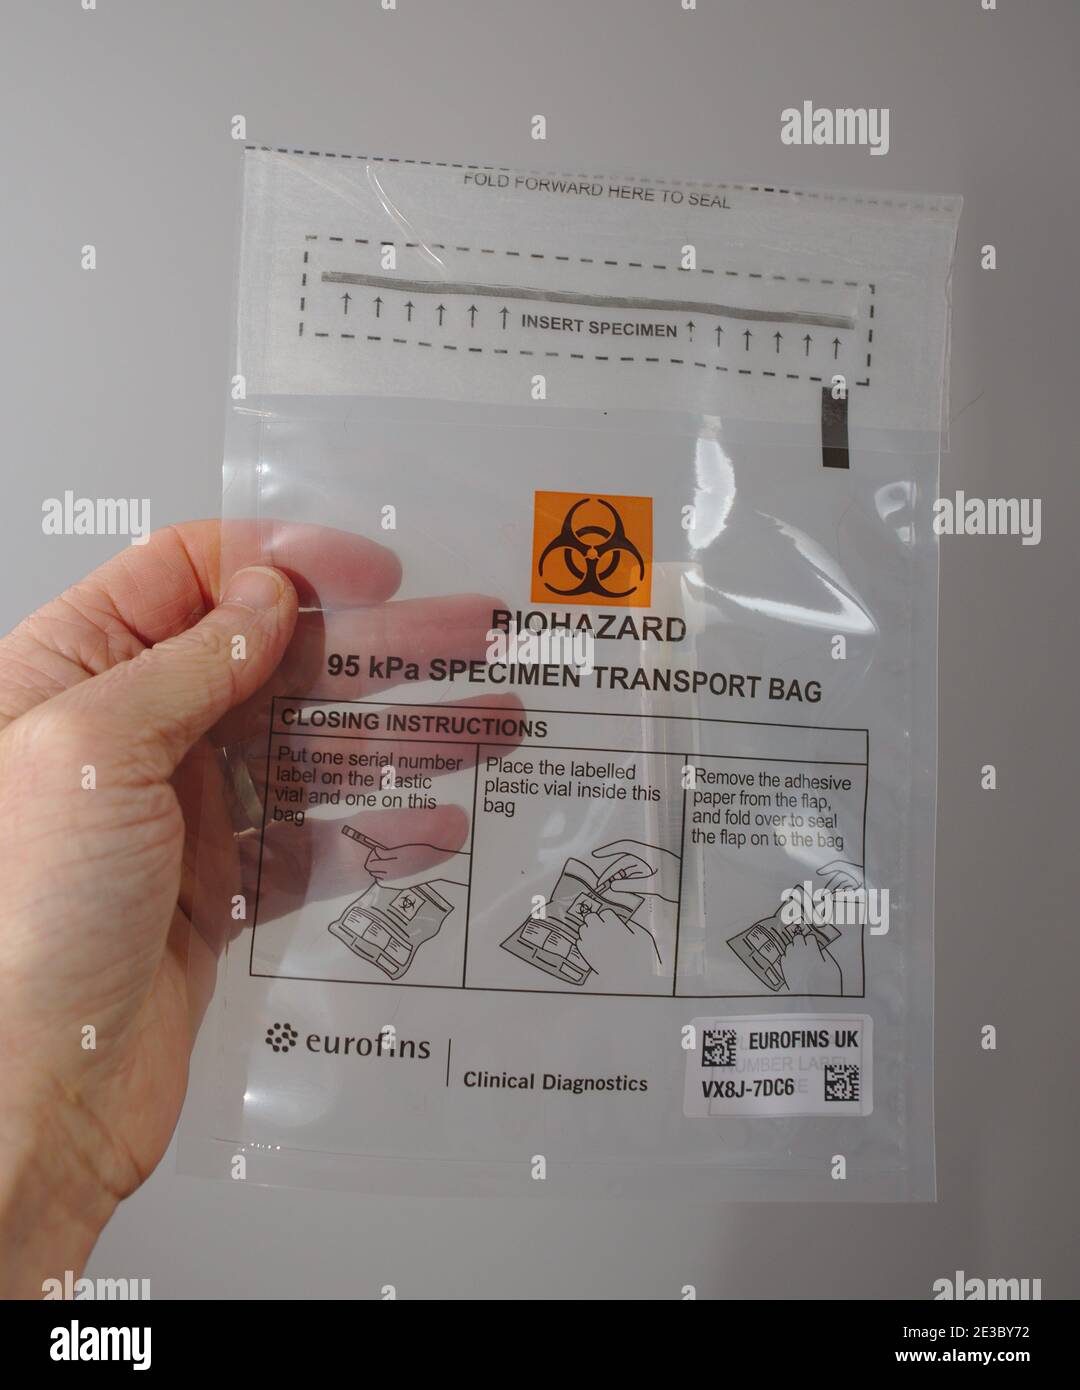 Coronavirus covid 19 home test kit sample in biohazard transport bag ready to be boxed and returned for testing. Stock Photo